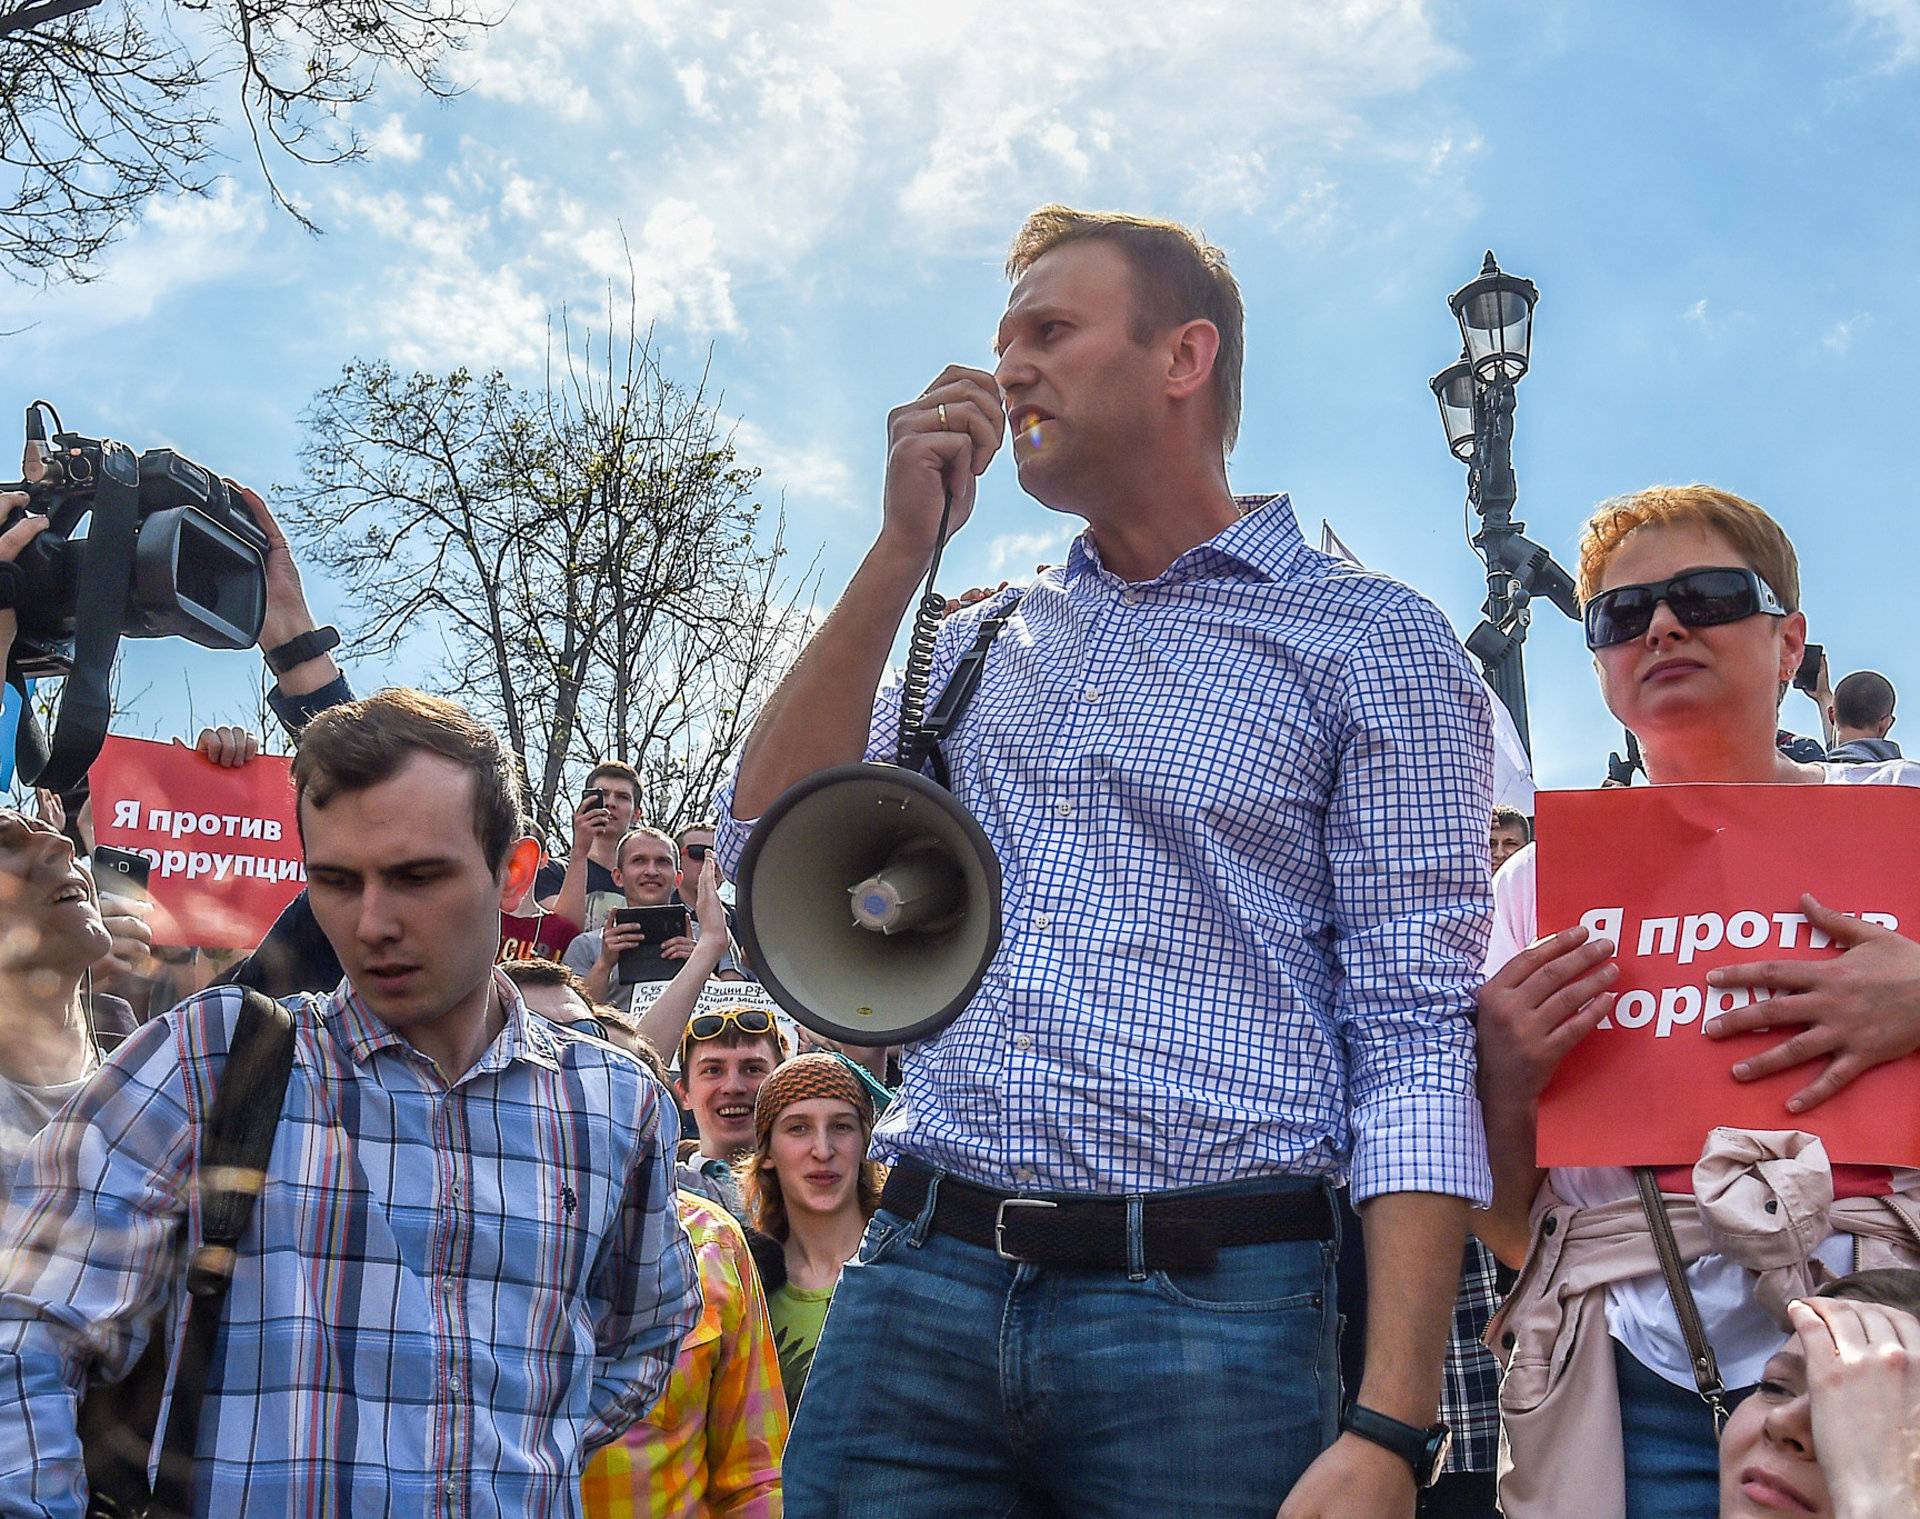 Russian opposition leader Alexei Navalny attends a protest rally ahead of President Vladimir Putin's inauguration ceremony, Moscow